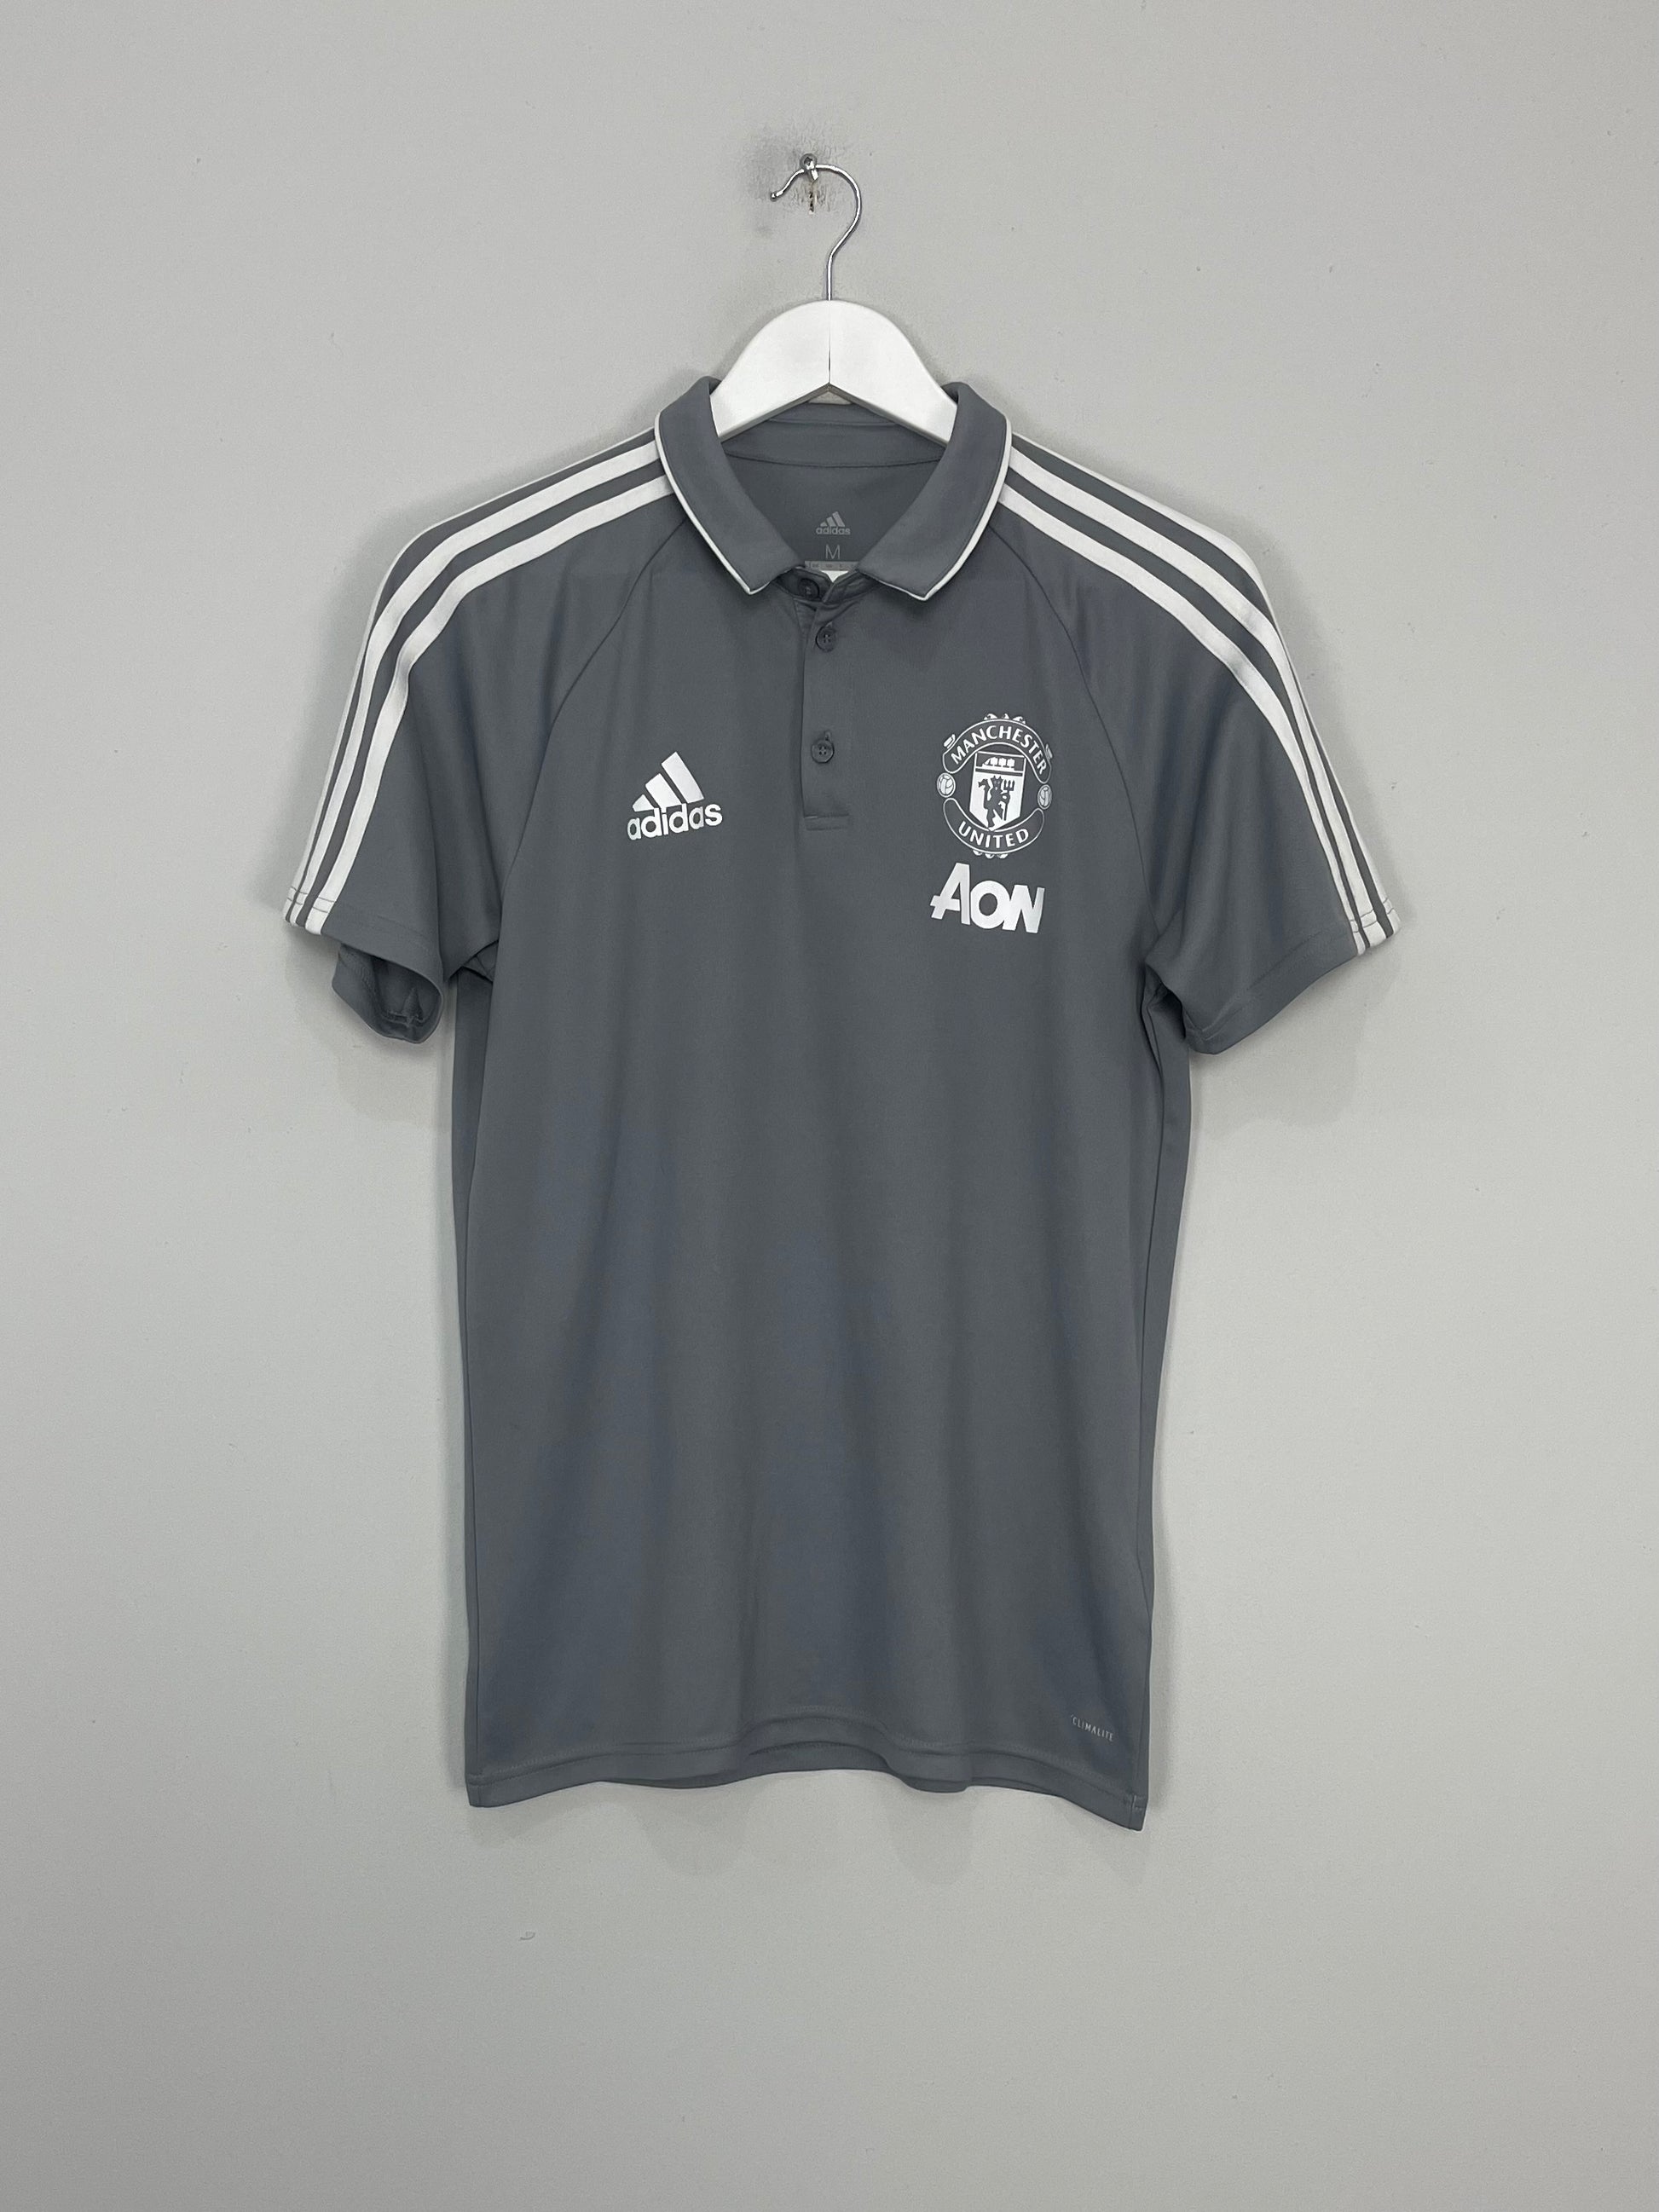 Image of the Manchester United polo shirt from the 2017/18 season